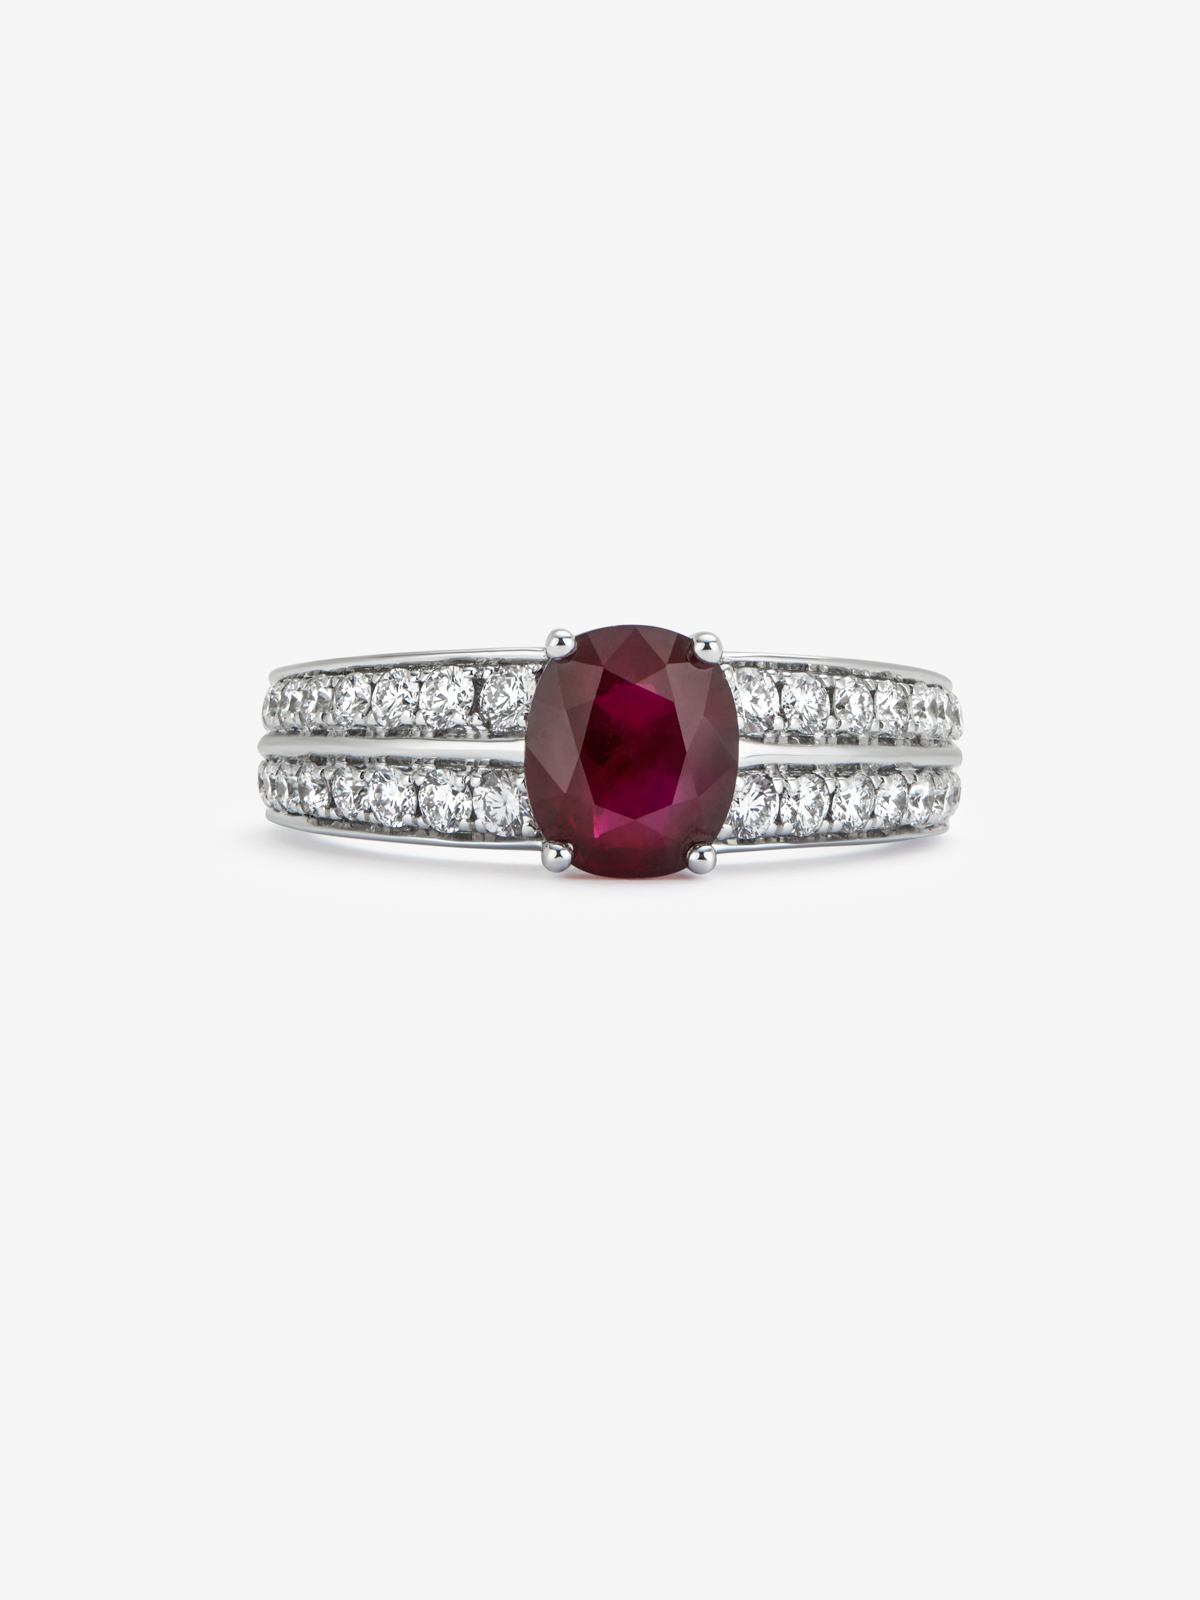 18K white gold ring with cushion-cut pigeon blood ruby ​​of 1.73 cts and 32 brilliant-cut diamonds with a total of 0.52 cts